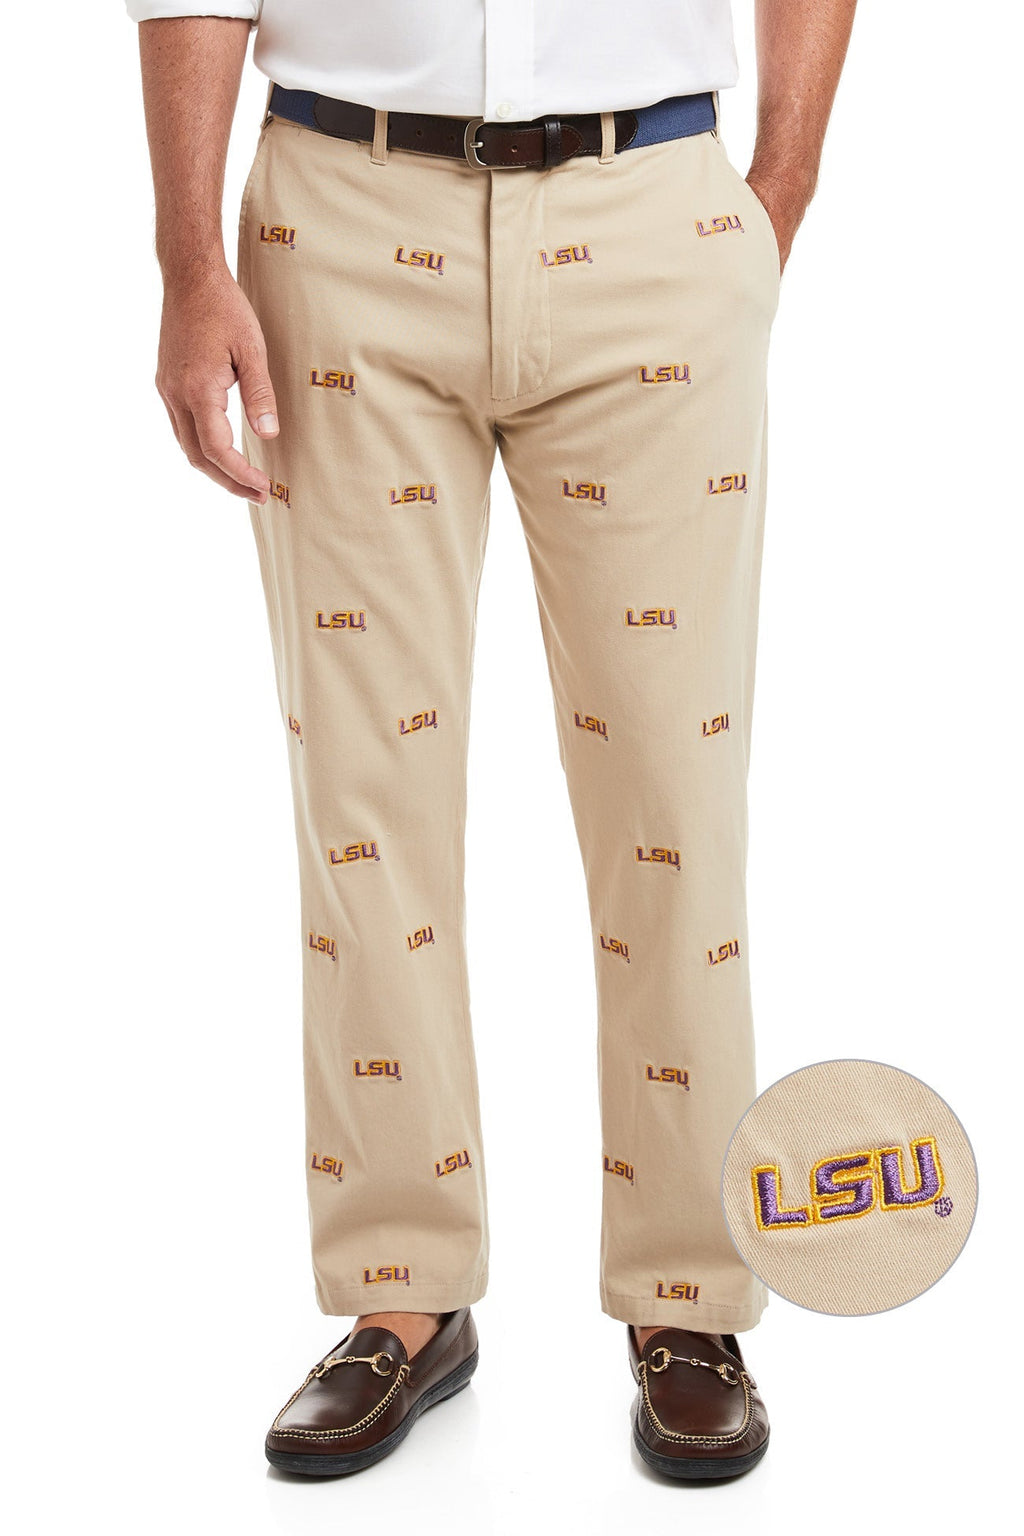 Collegiate Stretch Twill Pant Khaki with LSU MENS EMBROIDERED PANTS Castaway Nantucket Island